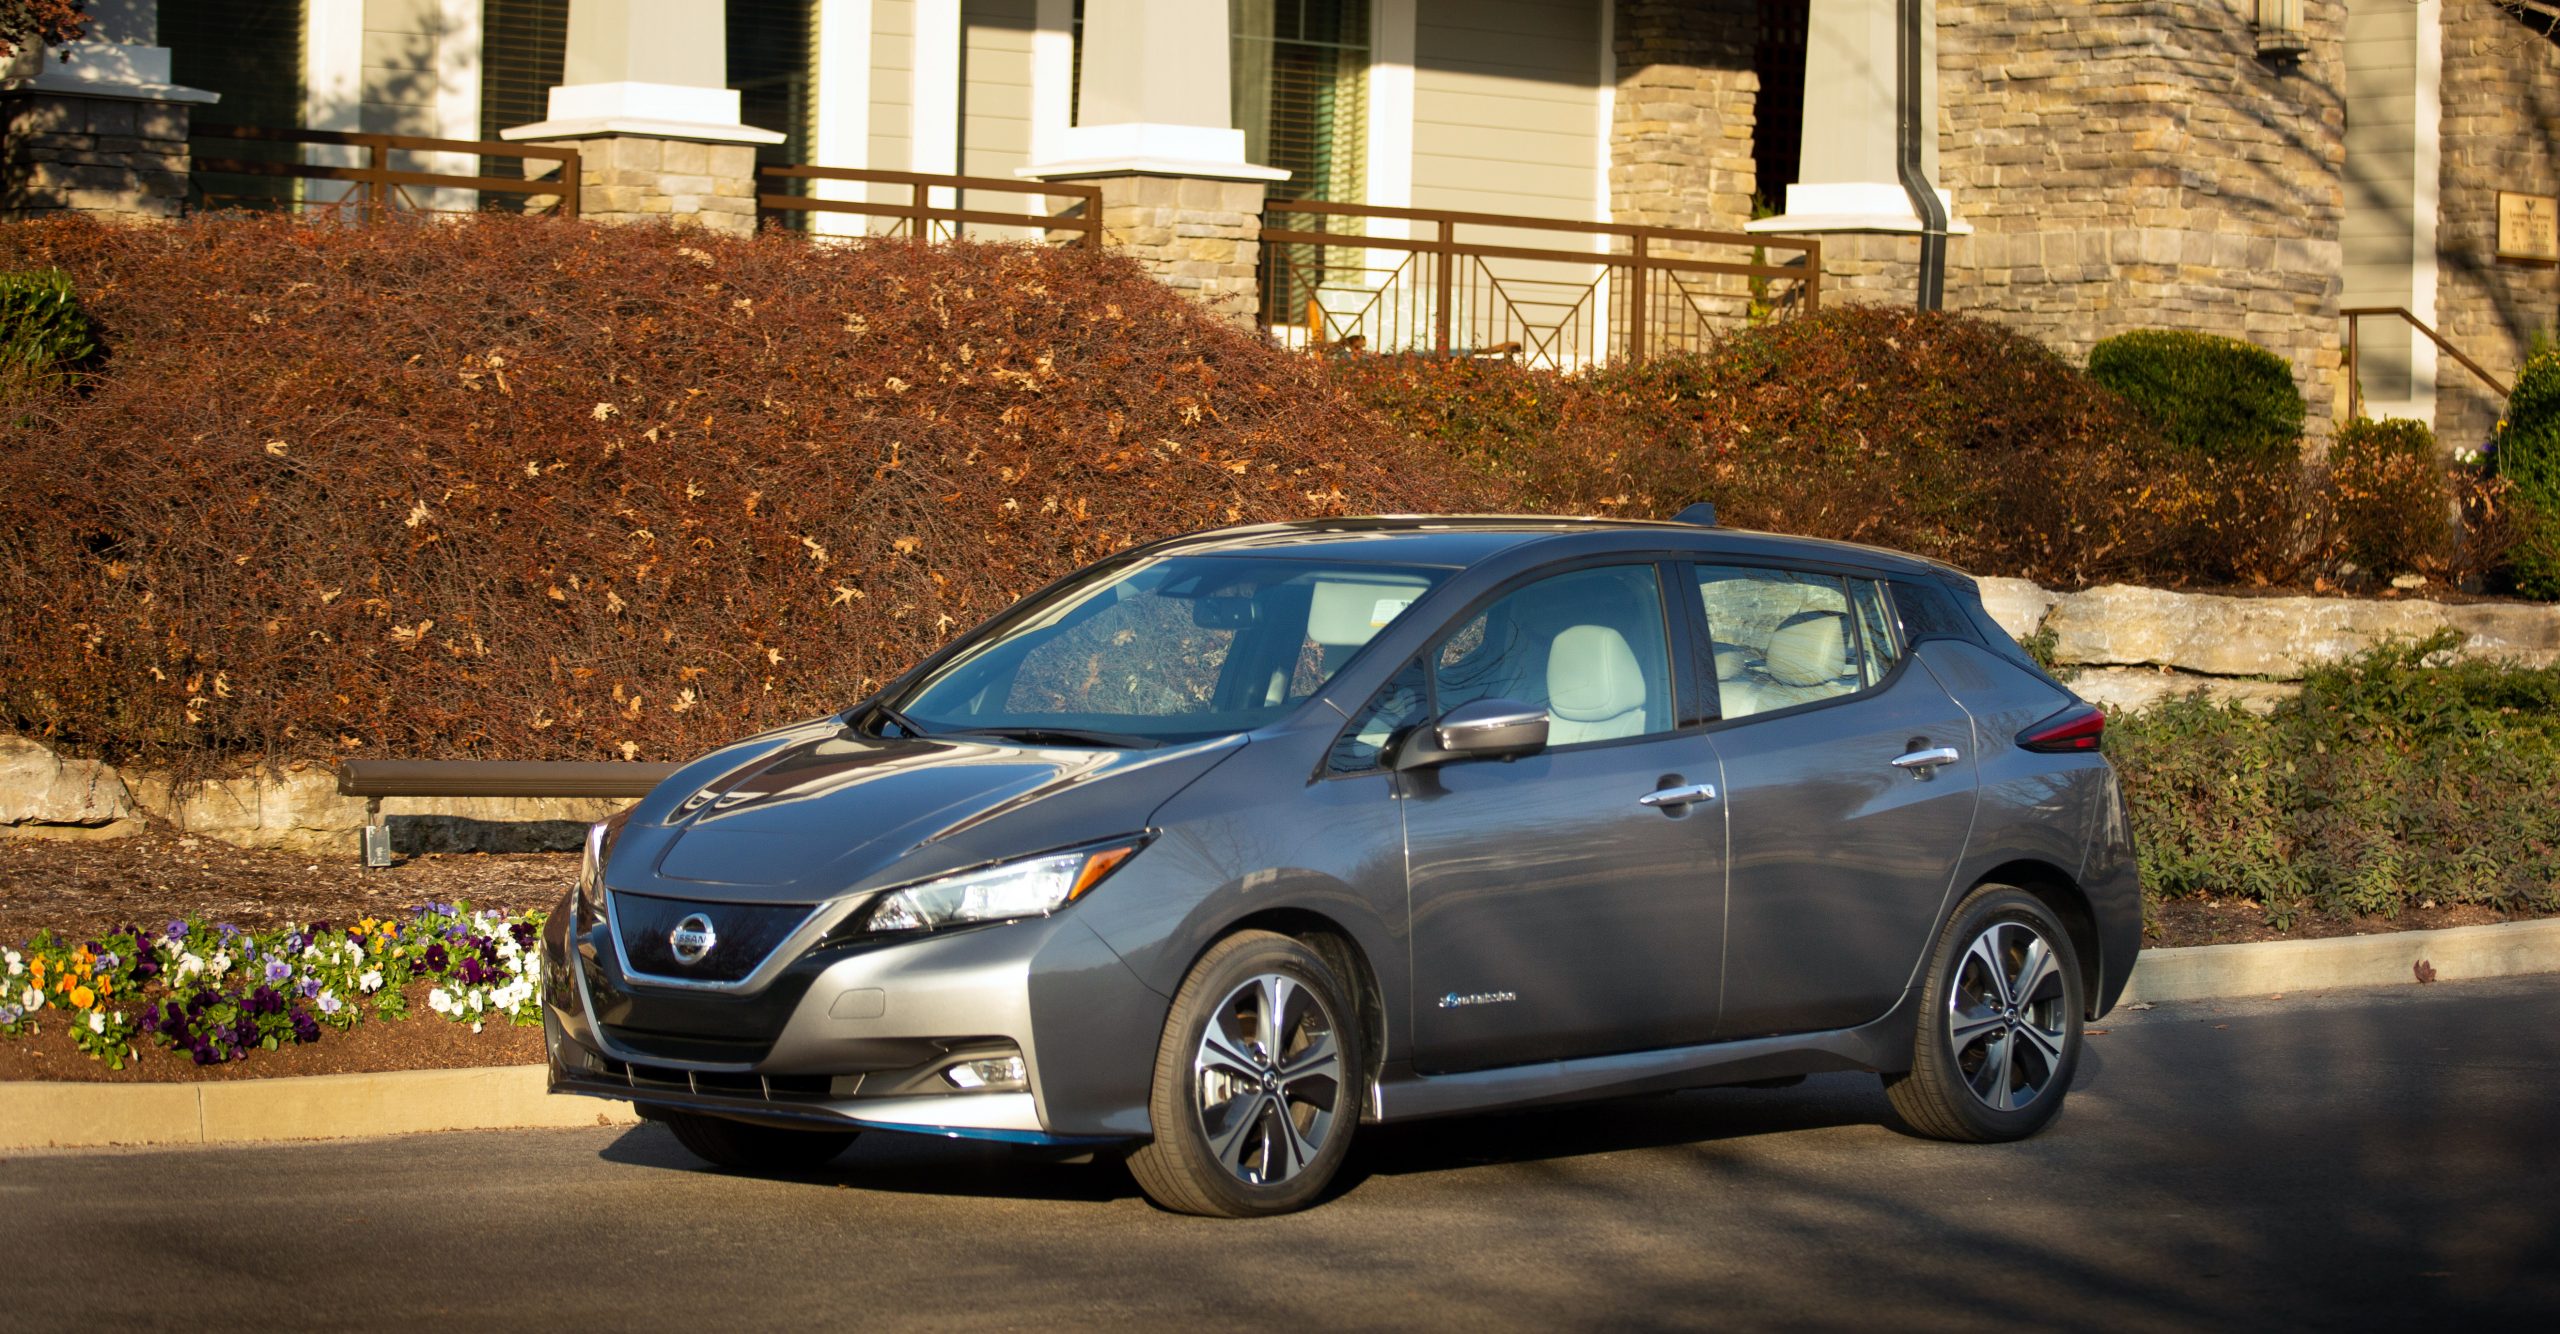 The 2022 Nissan LEAF SL PLUS offers more drive range and options for